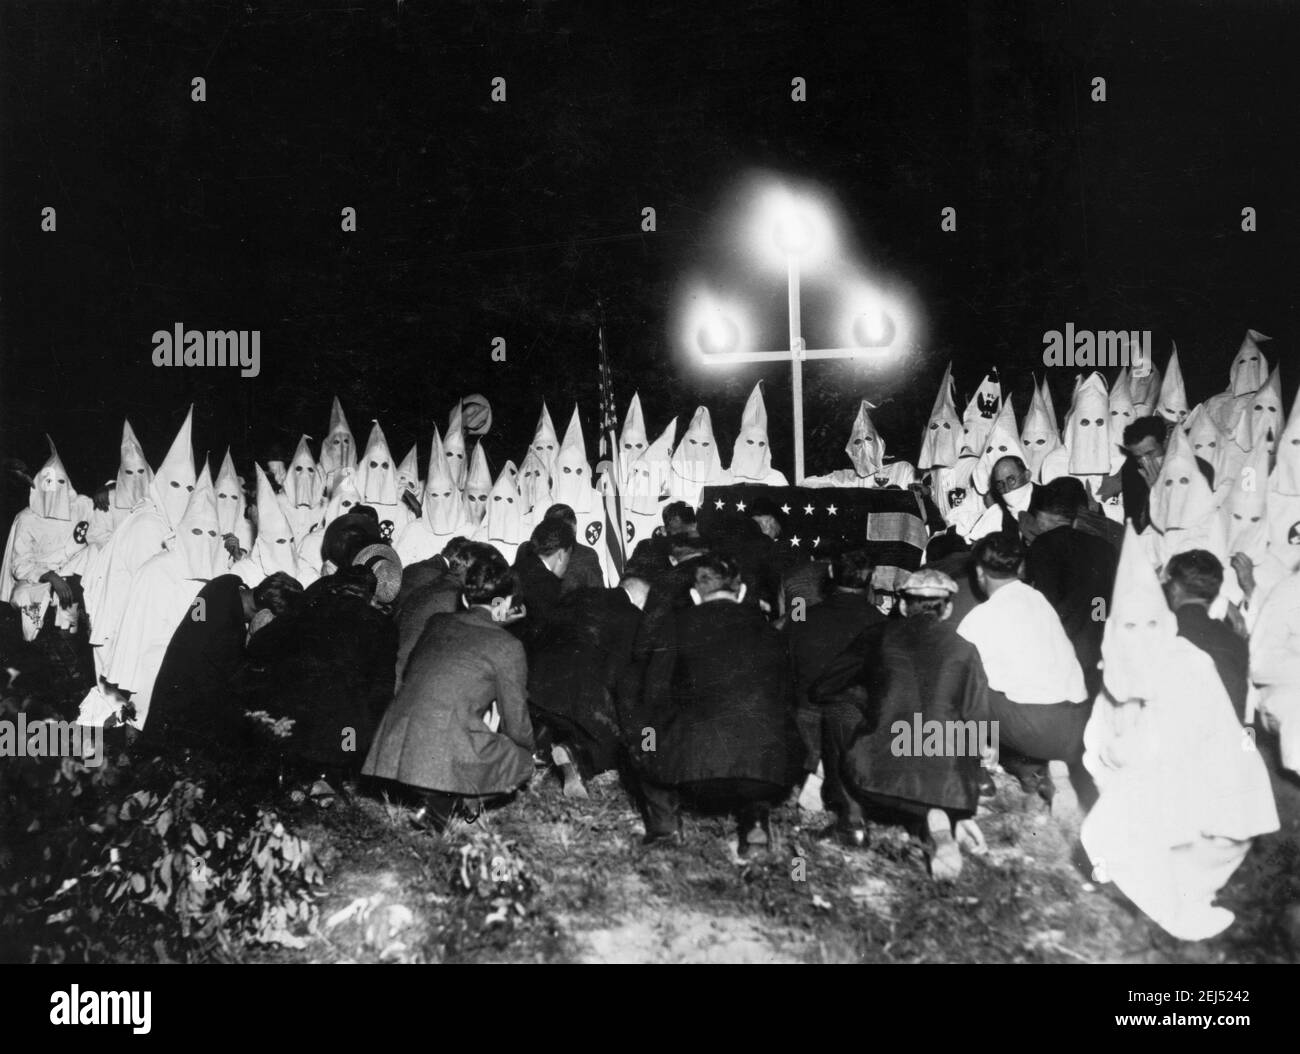 Ku Klux Klan. Shrouded members of the Klan in the background with new candidates kneeling before them, Washington DC, c. 1920-1930 Stock Photo